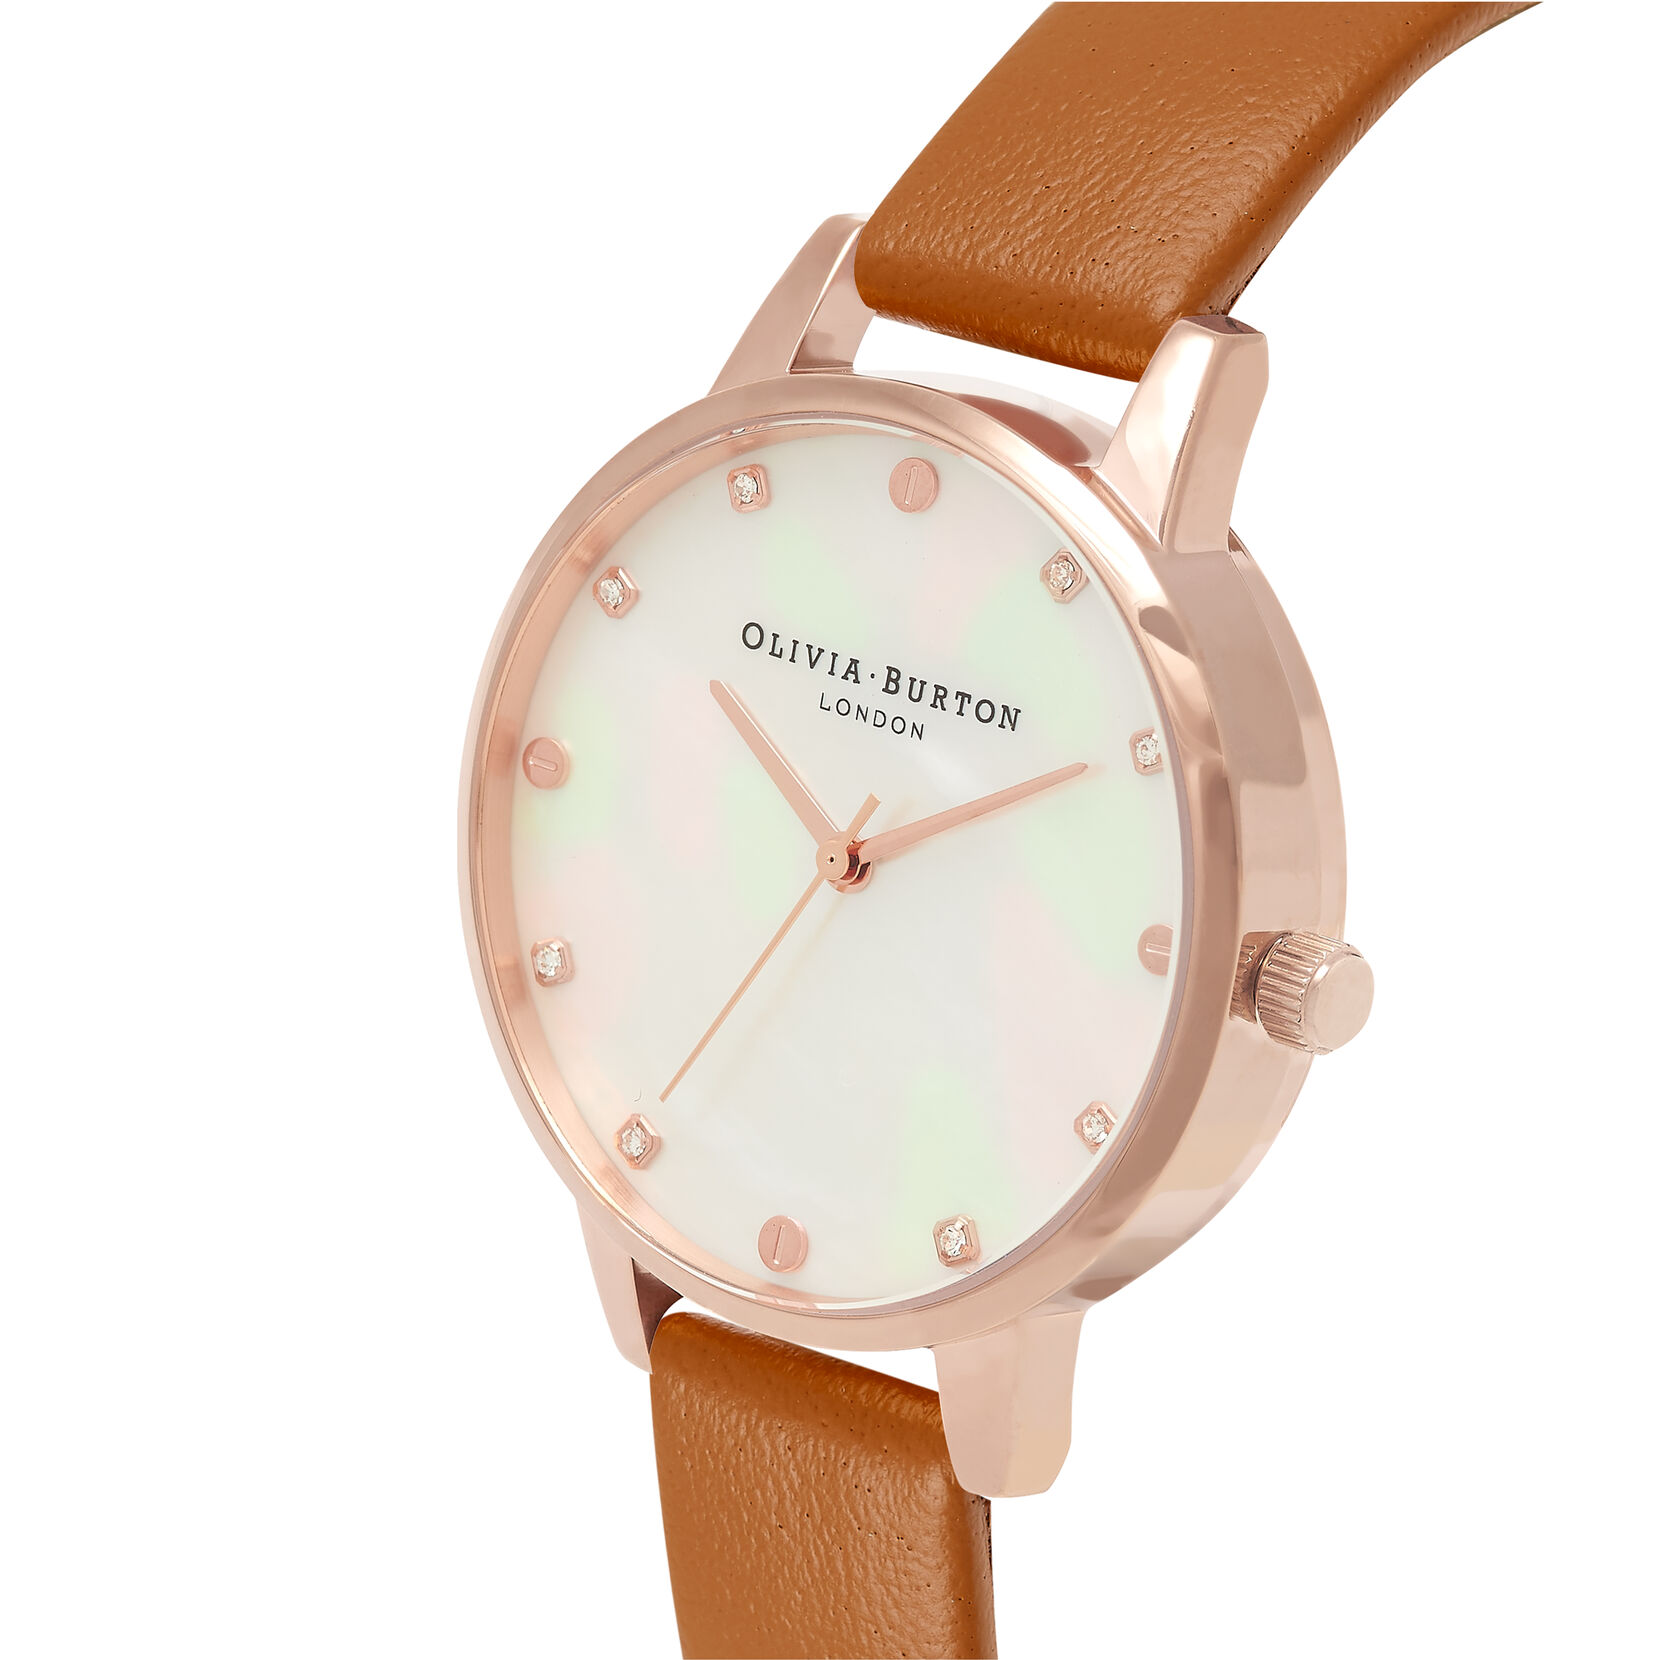 34mm Rose Gold & Tan Leather Strap Watch